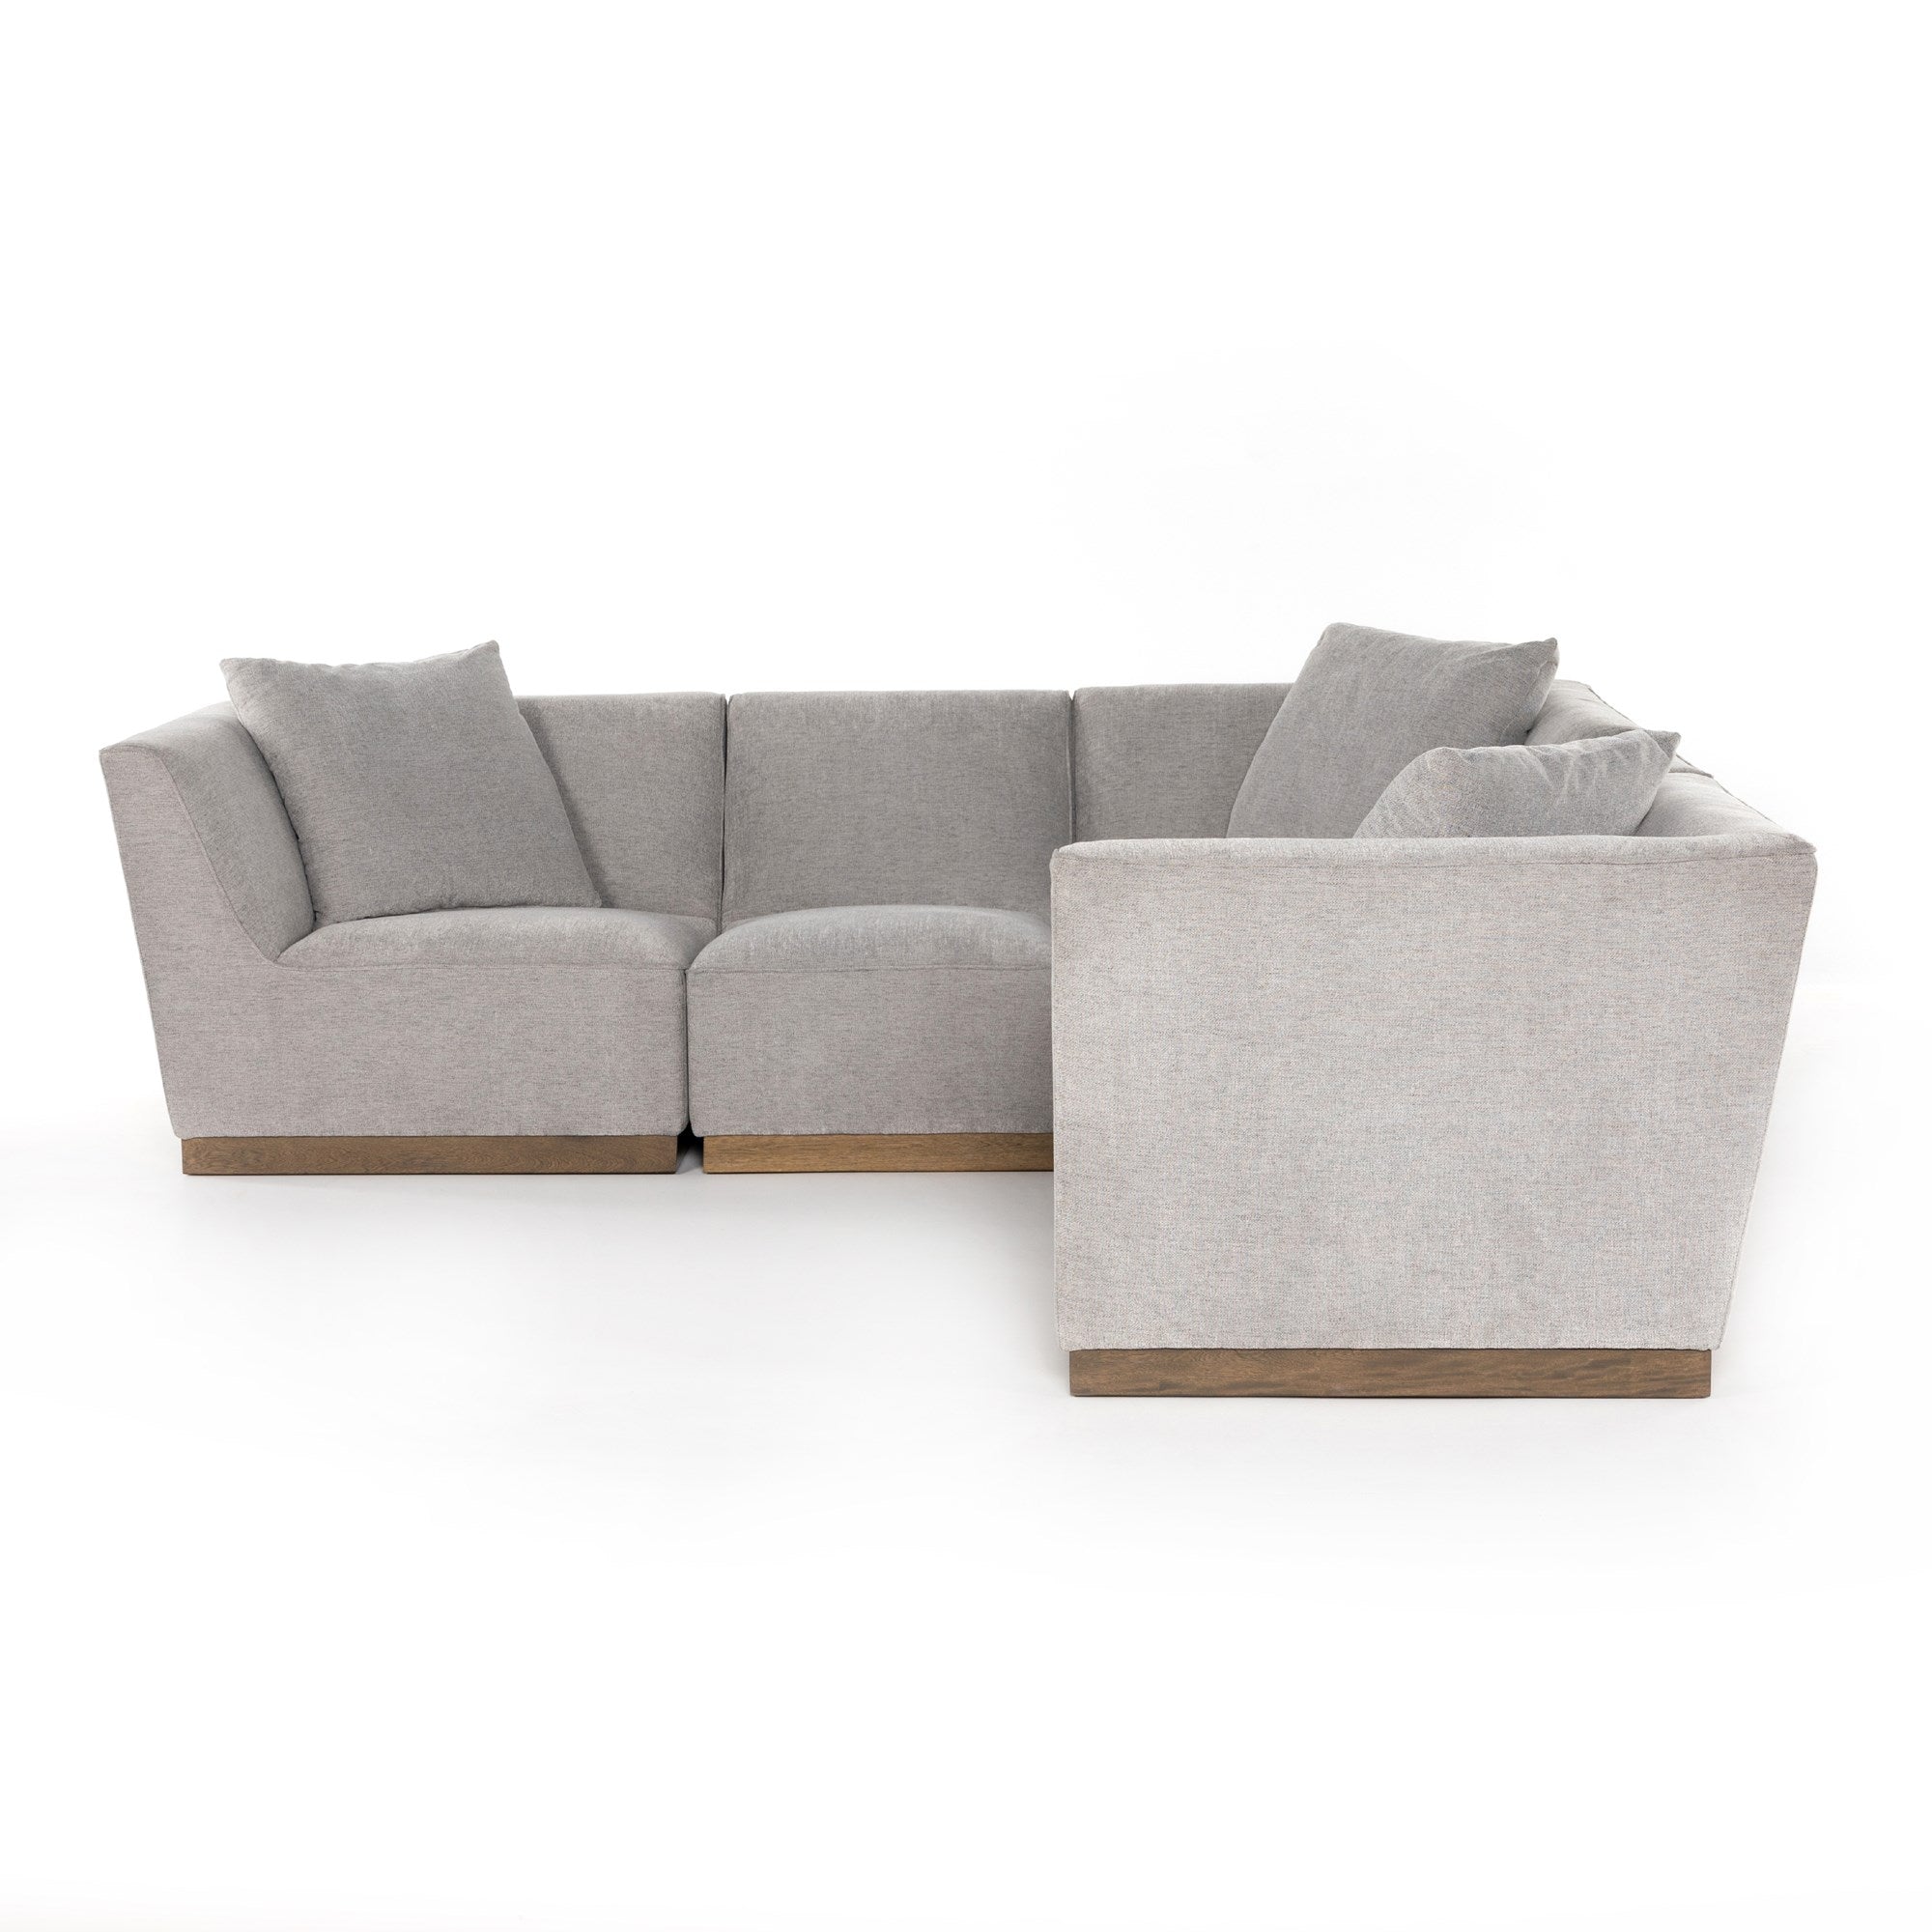 Gentry 5 Piece Sectional